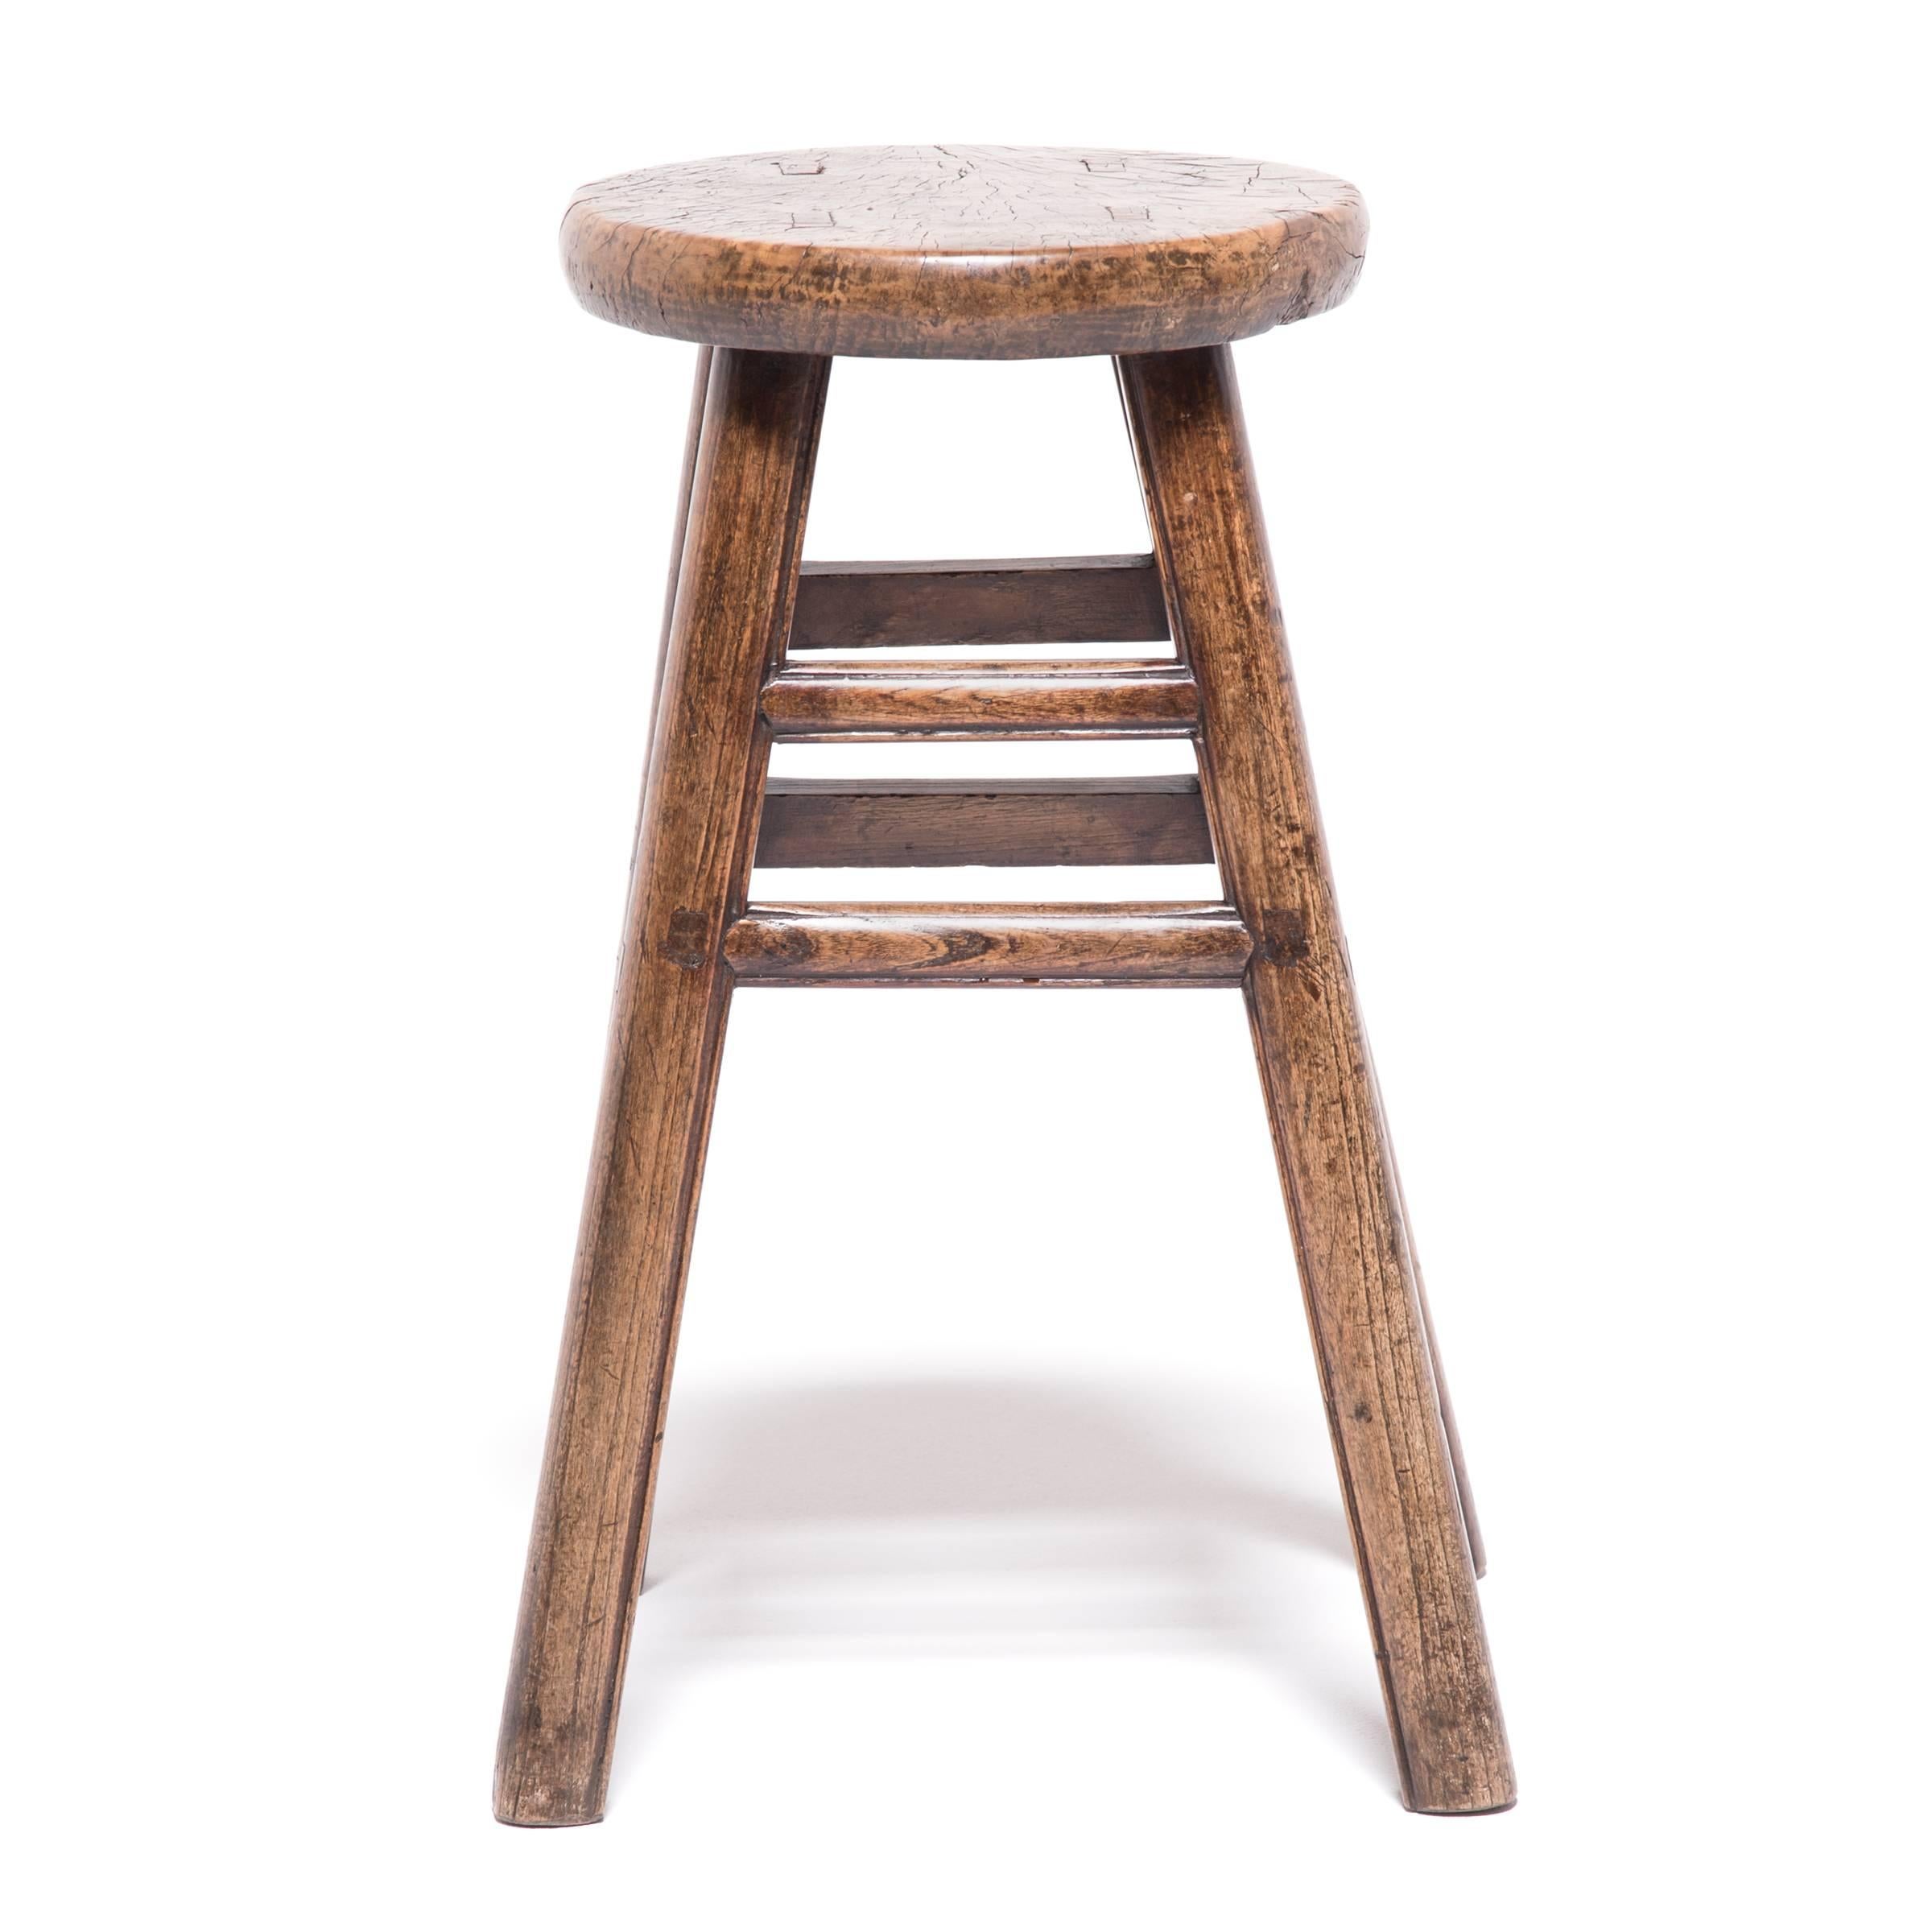 Like the full moon displaying its craters and ridges, the round seat of this otherwise straightforward stool displays the swirling grain and unusual markings of burled wood. Cultivated from irregular growths on trees, this type of wood is prized for